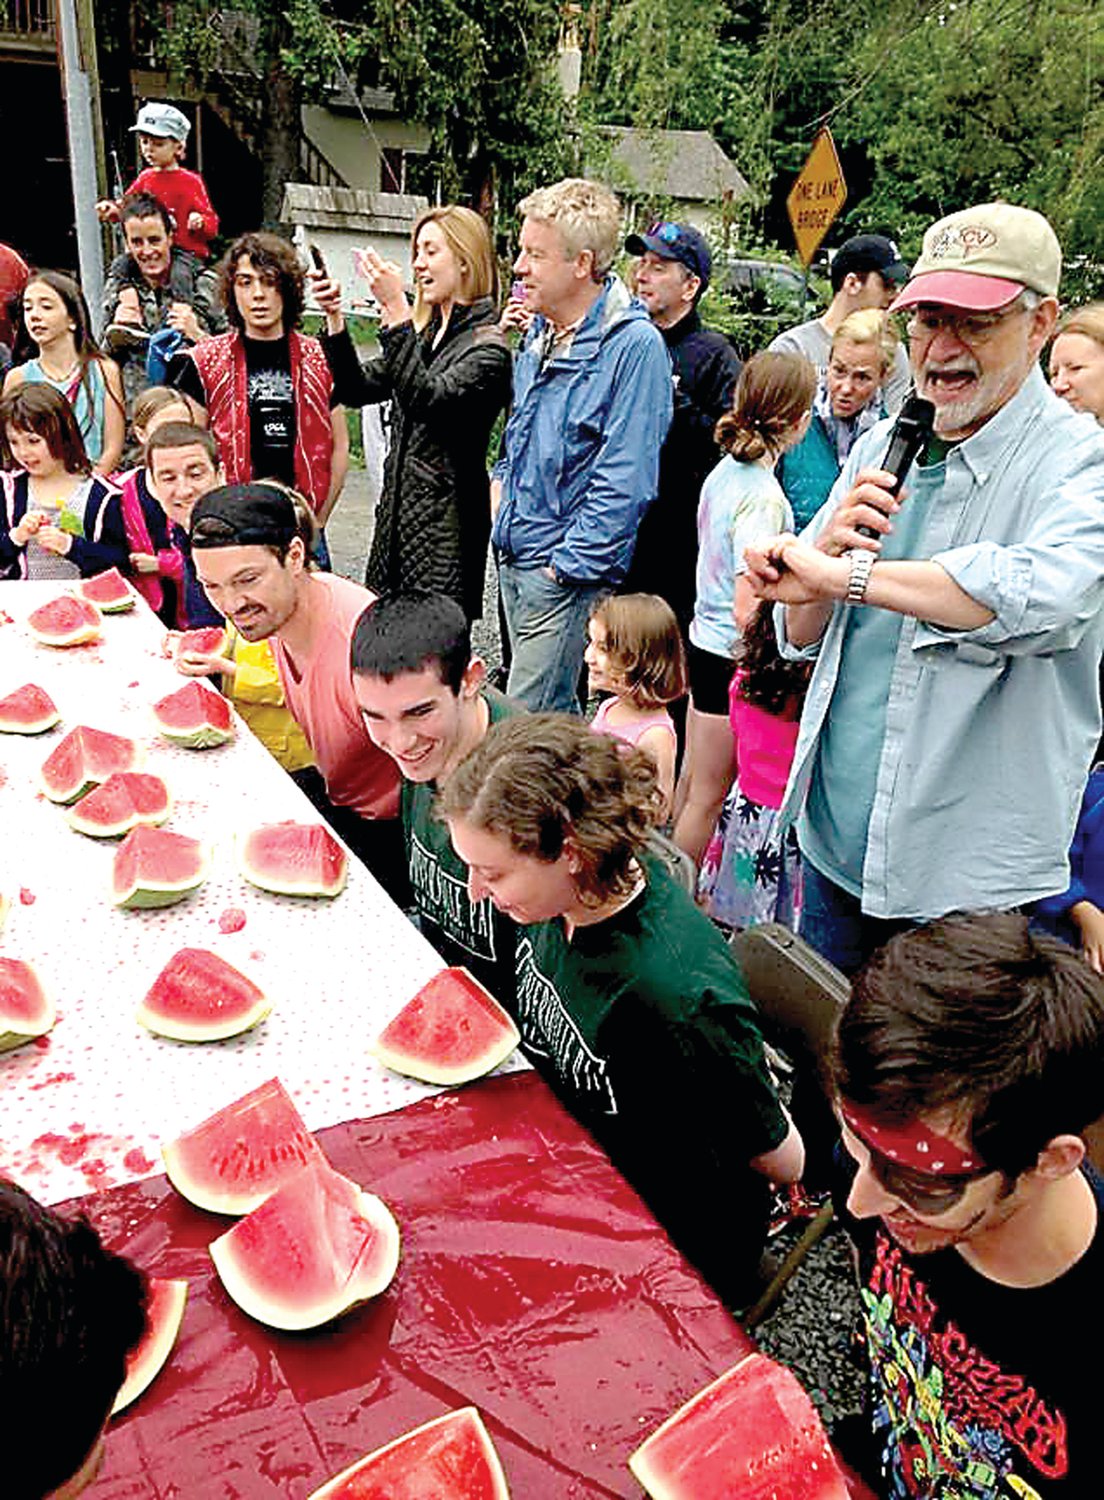 Contestants in a Carversville Day watermelon-eating contest get ready to dig in. The next Carversville Day, offering a watermelon-eating contest and much more, is set for May 18.